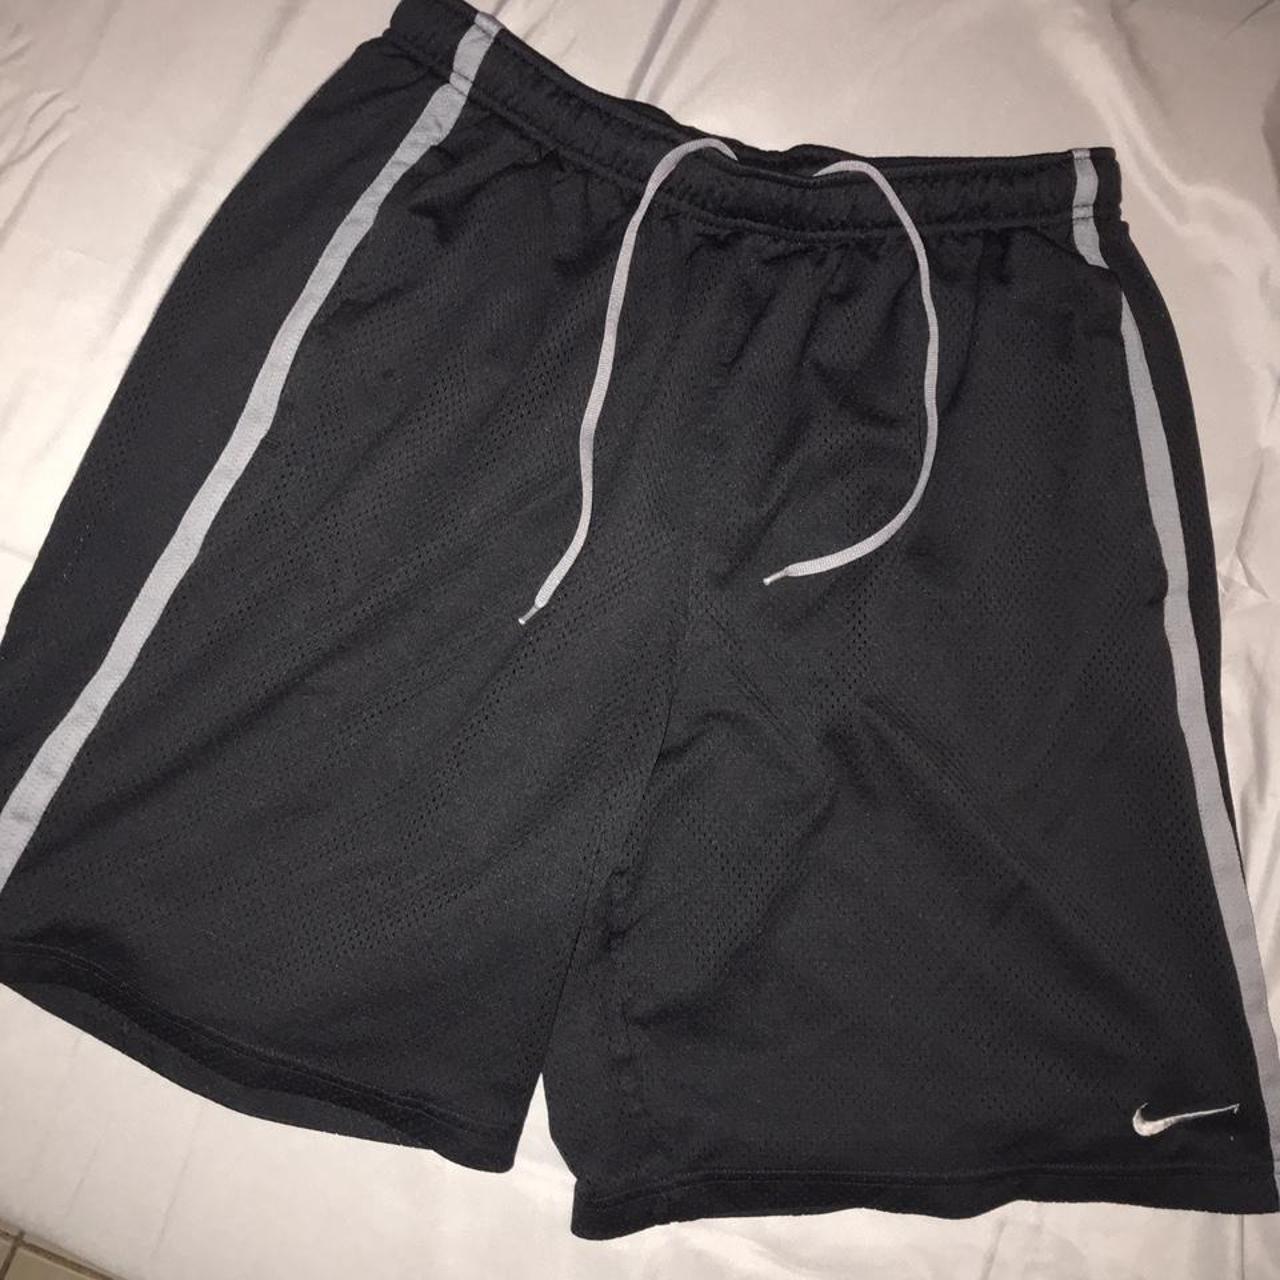 Vintage Nike Boxing Shorts. This is an original and... - Depop